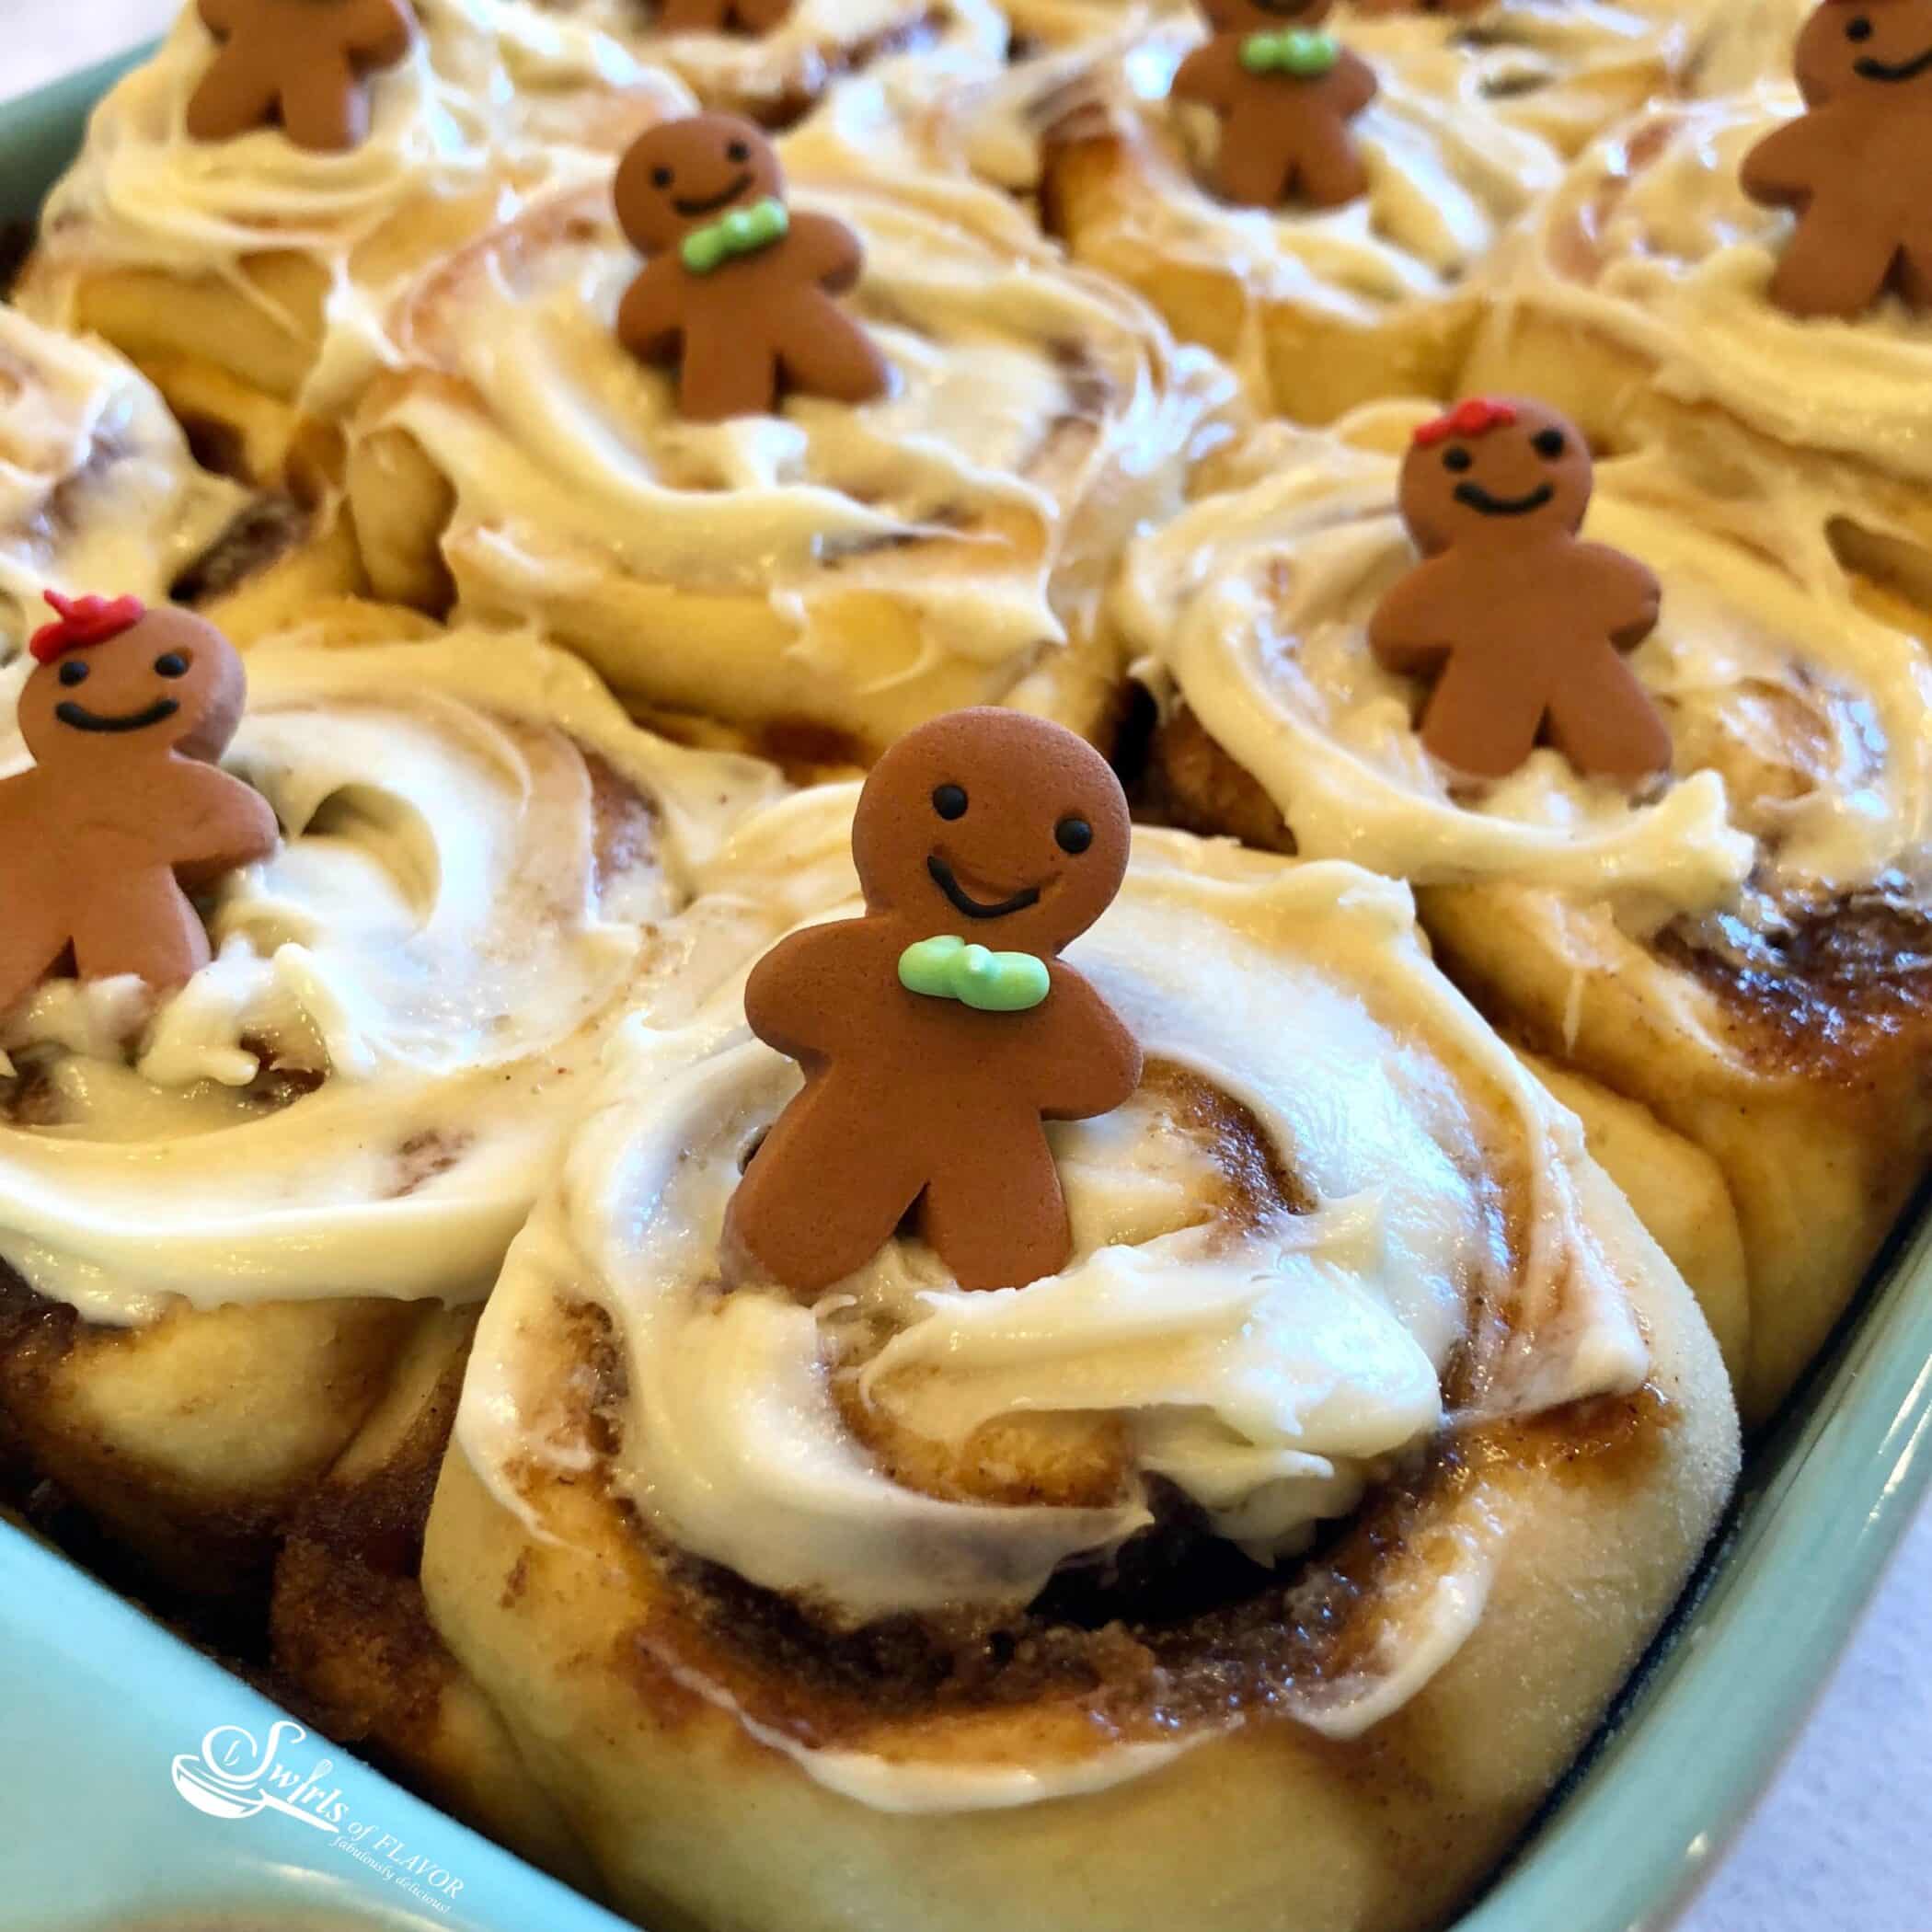 Christmas morning and Gingerbread Cinnamon Rolls go hand in hand. Gingerbread Cinnamon Rolls is an easy recipe filled with gingerbread spices and brown sugar and topped with a silky cream cheese glaze. #cinnamonrolls #cinnamonbuns #gingerbread #breakfast #brunch #Christmas #holiday #entertaining #easyrecipe #overnight #Makeahead #baking #swirlsofflavor